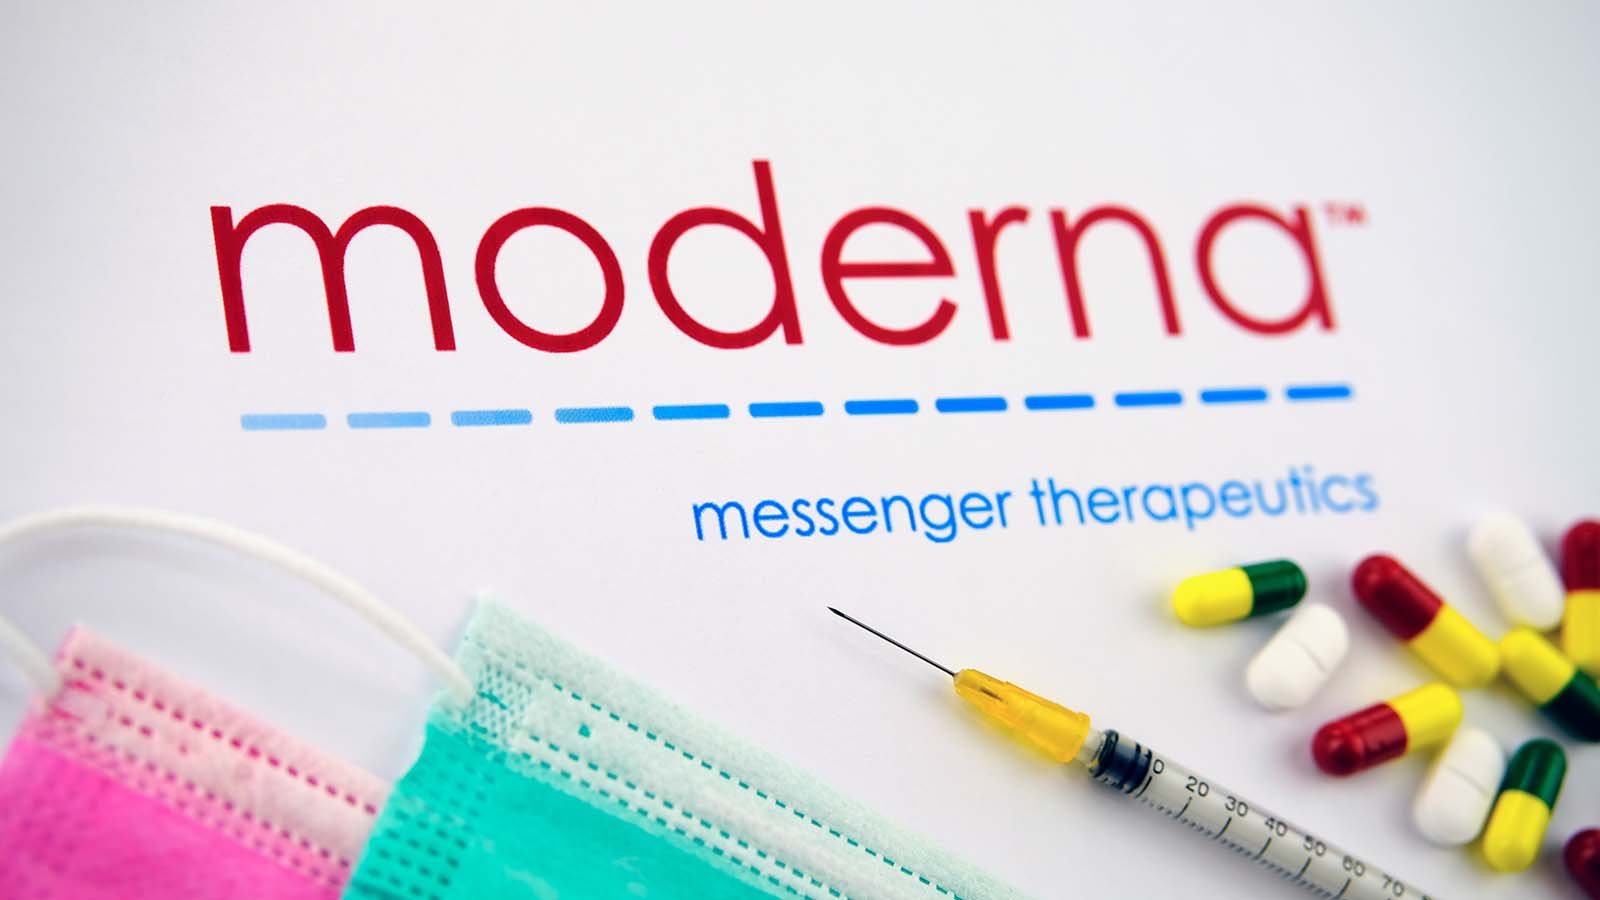 The Moderna (MRNA) logo surrounded by syringes, pills and disposable face masks.